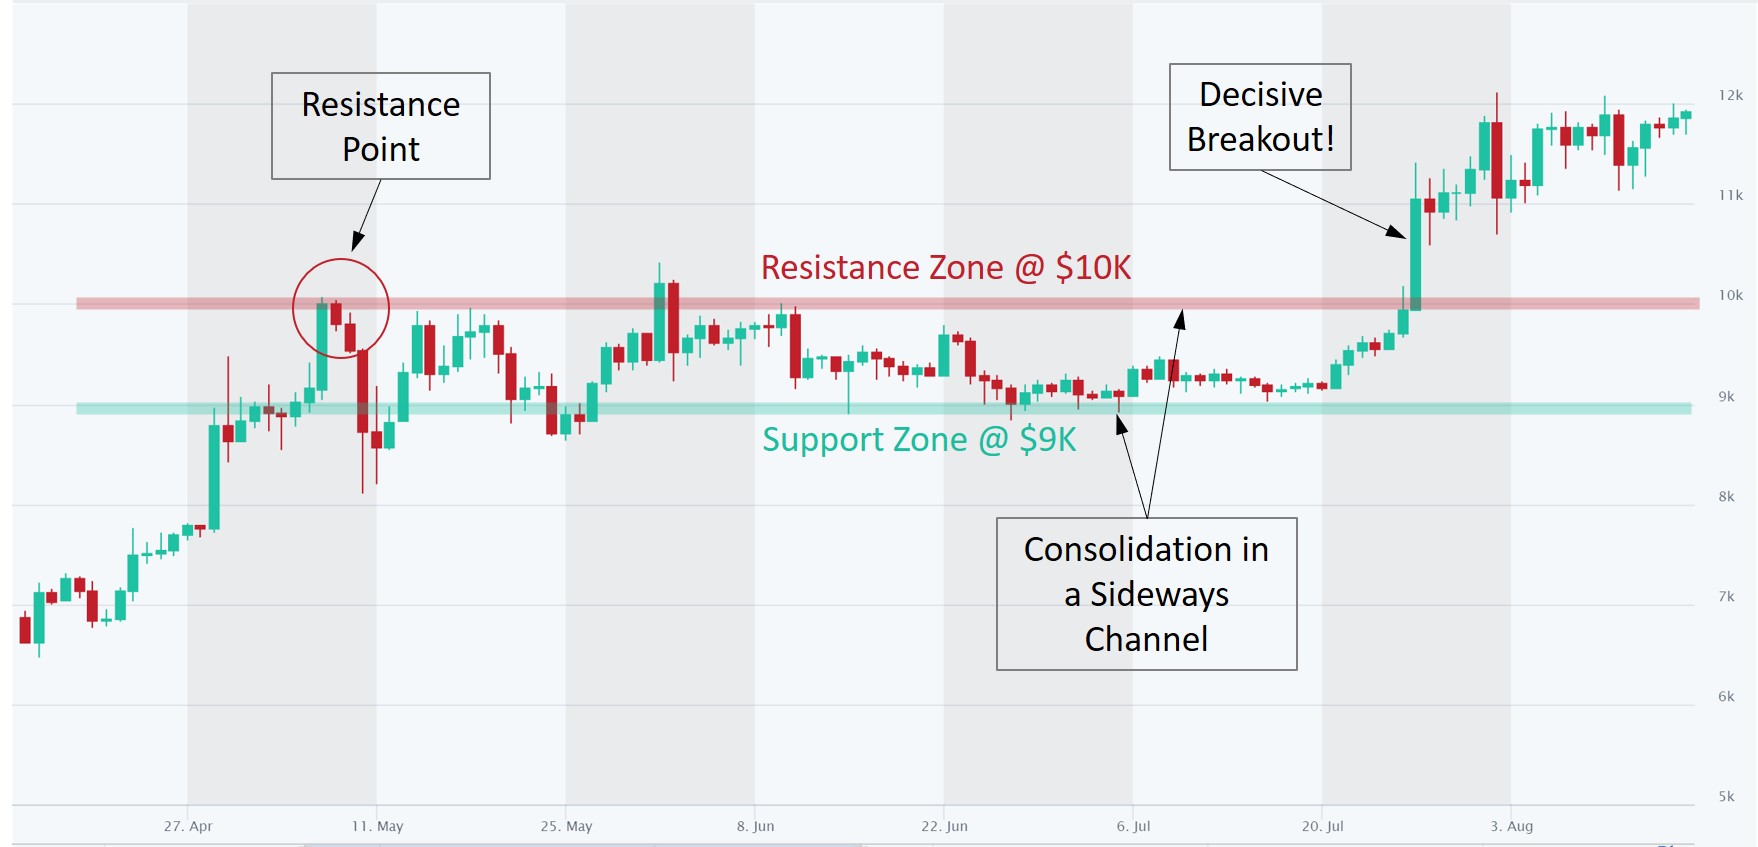 Bitcoin Technical Analysis: Key Support and Resistance Levels